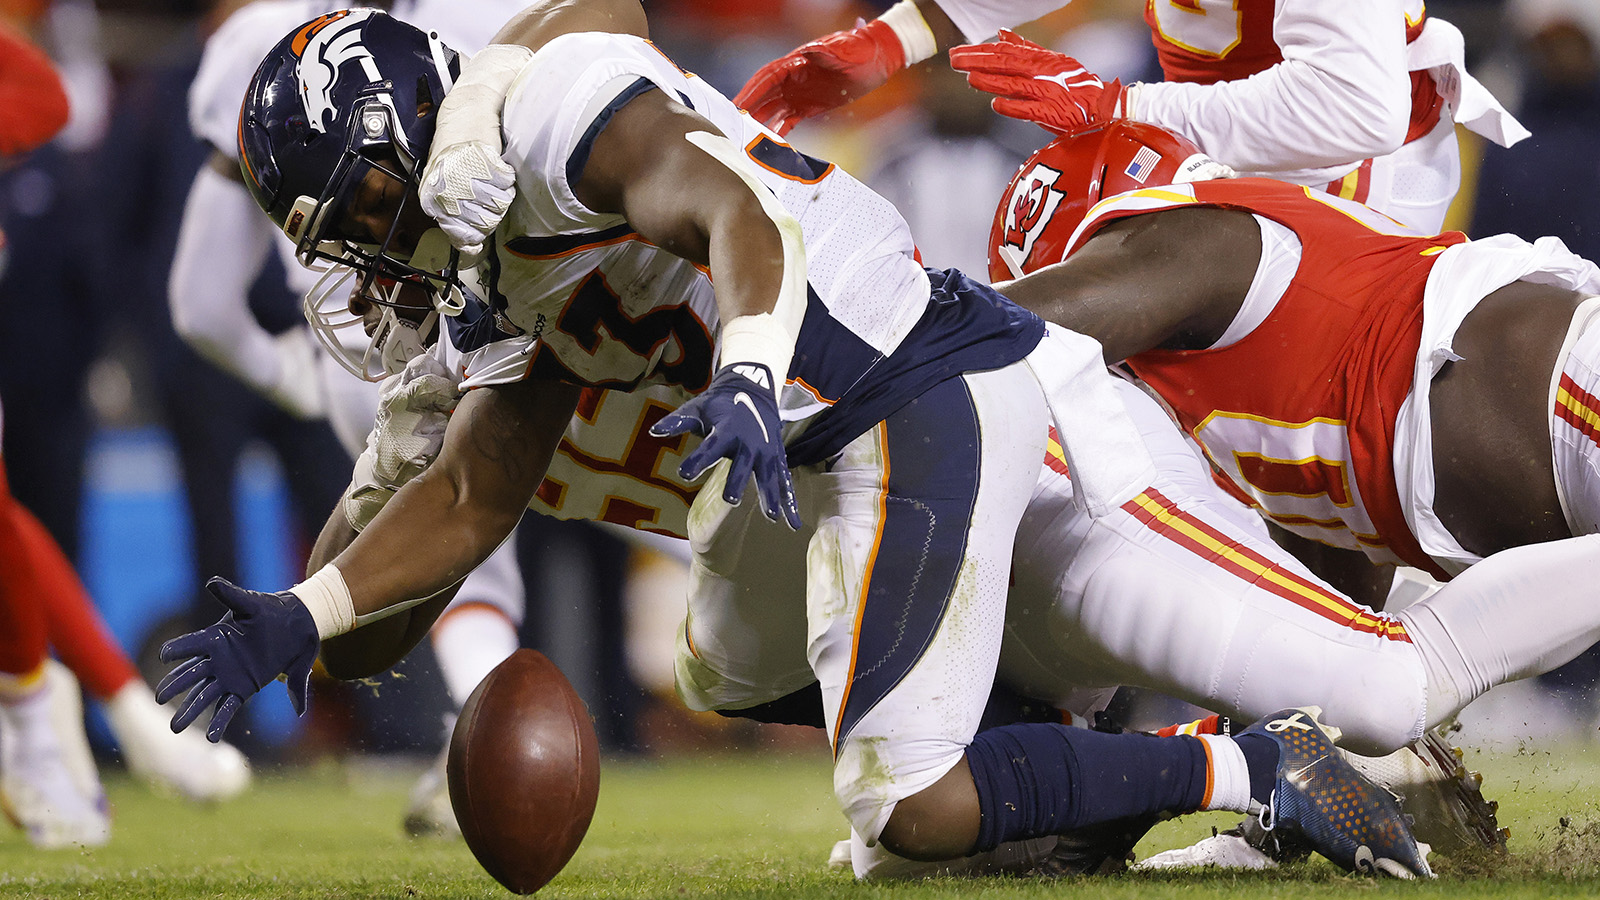 Javonte Williams of the Denver Broncos fumbles and recovers the ball against the Kansas City Chiefs during the second half at Arrowhead Stadium on Dec. 5, 2021.